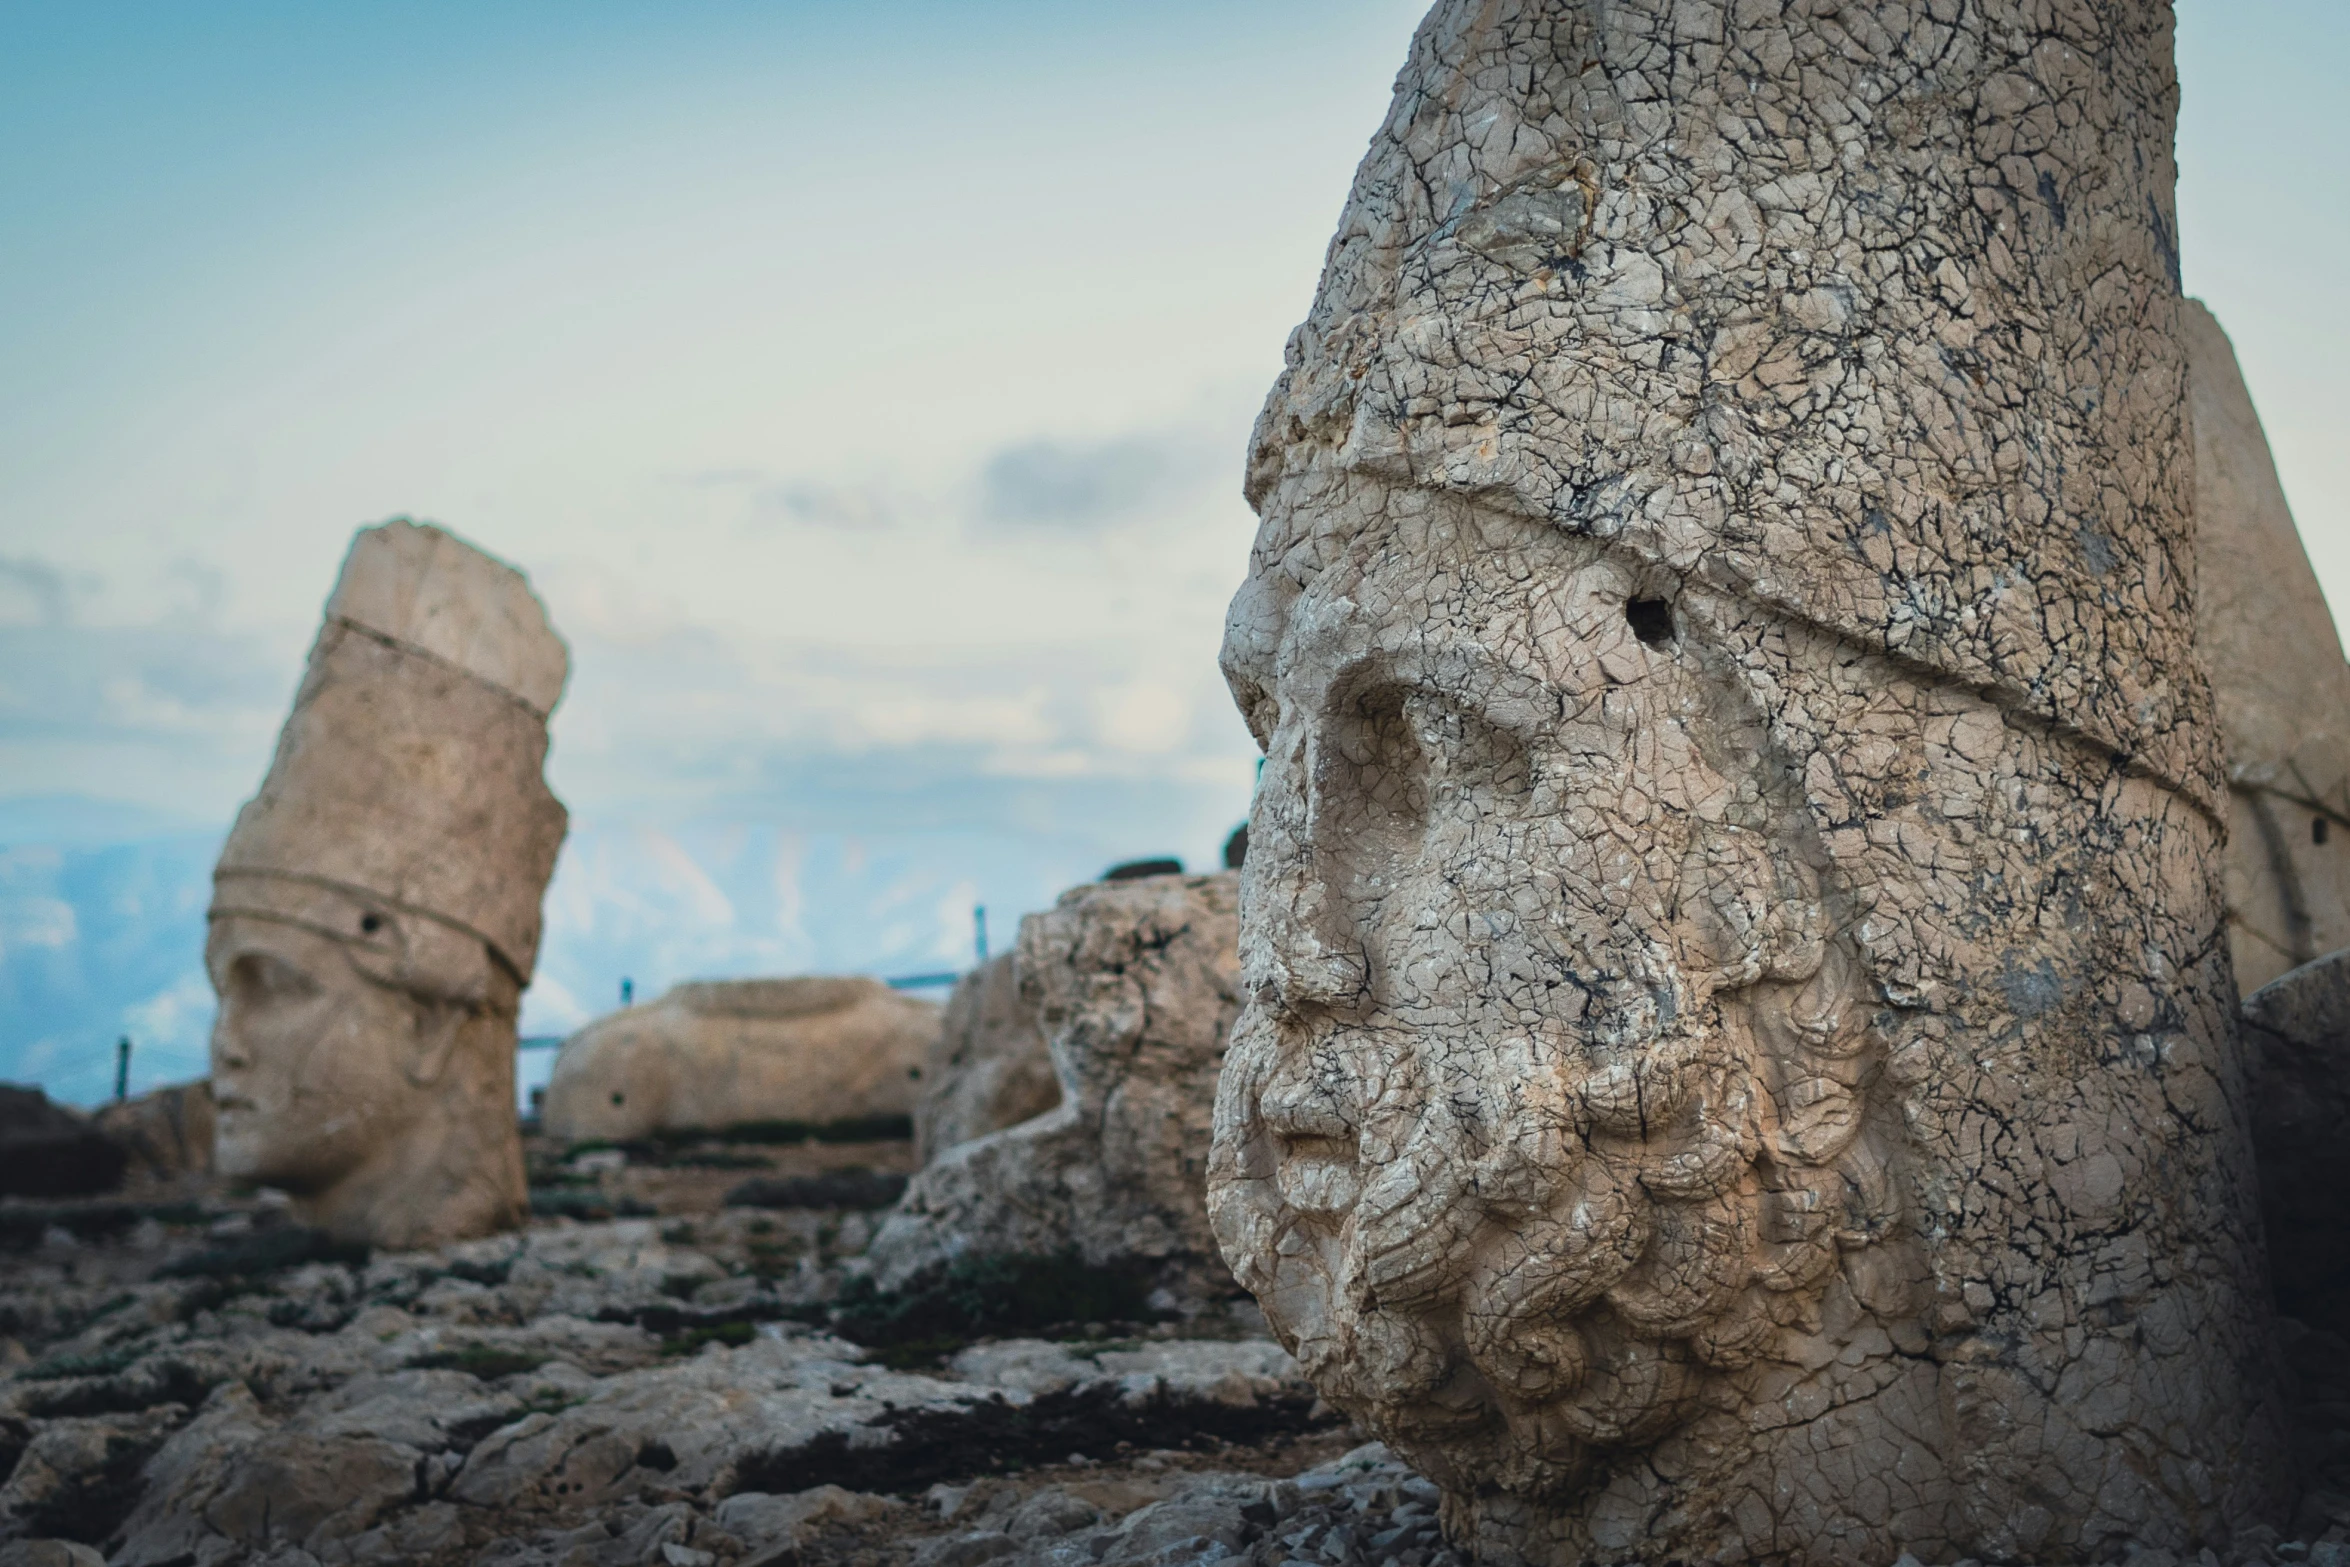 the large head of a person on some rocks